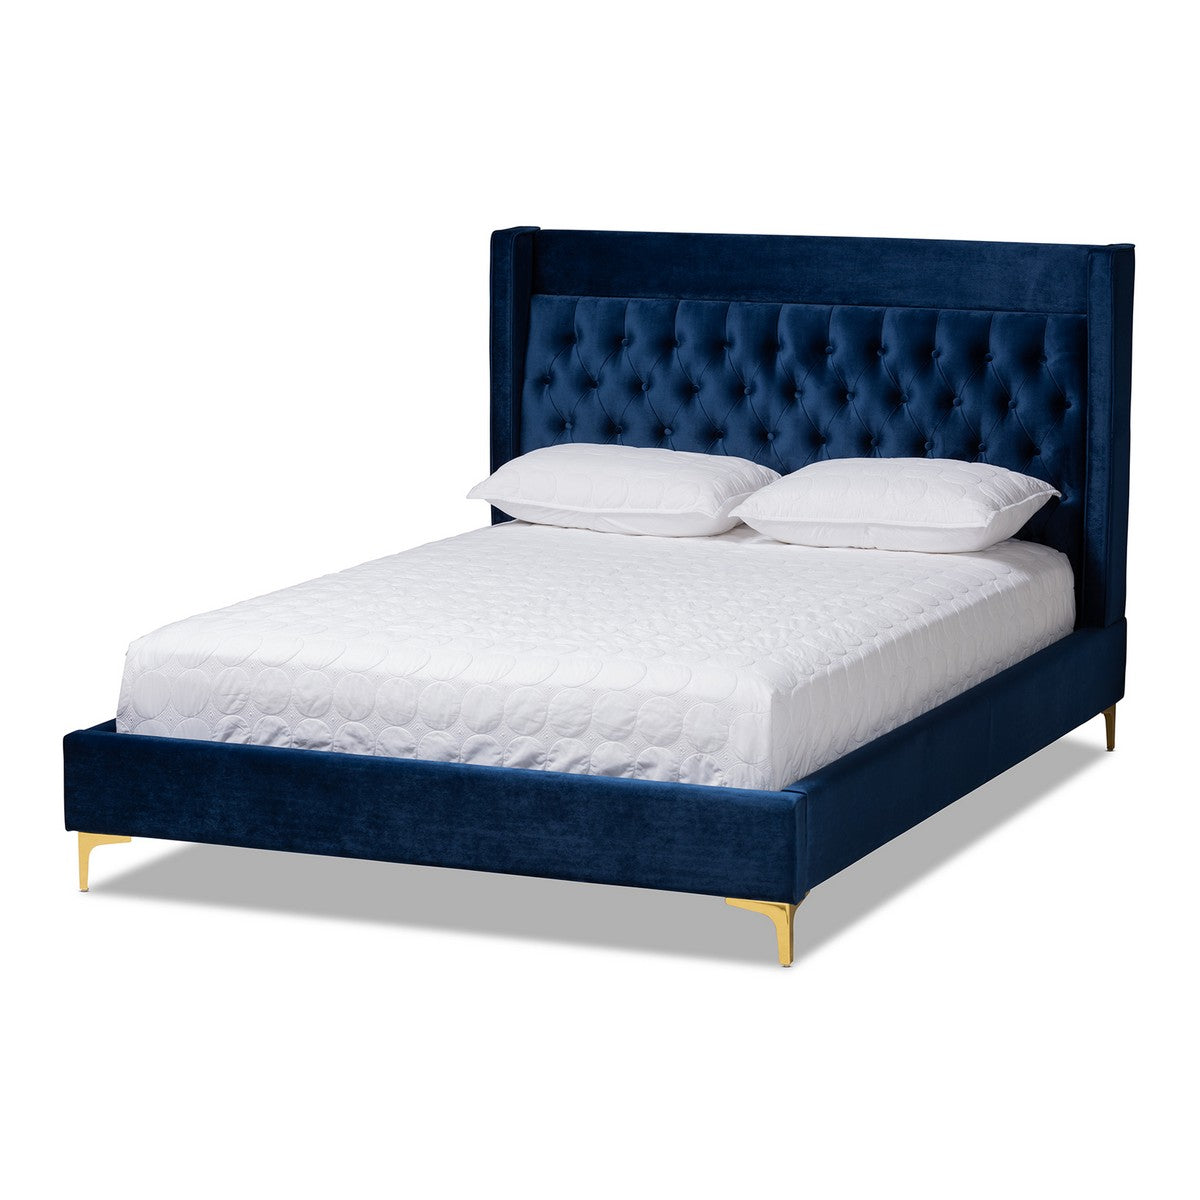 Baxton Studio Valery Modern and Contemporary Navy Blue Velvet Fabric Upholstered Queen Size Platform Bed with Gold-Finished Legs Baxton Studio-beds-Minimal And Modern - 1